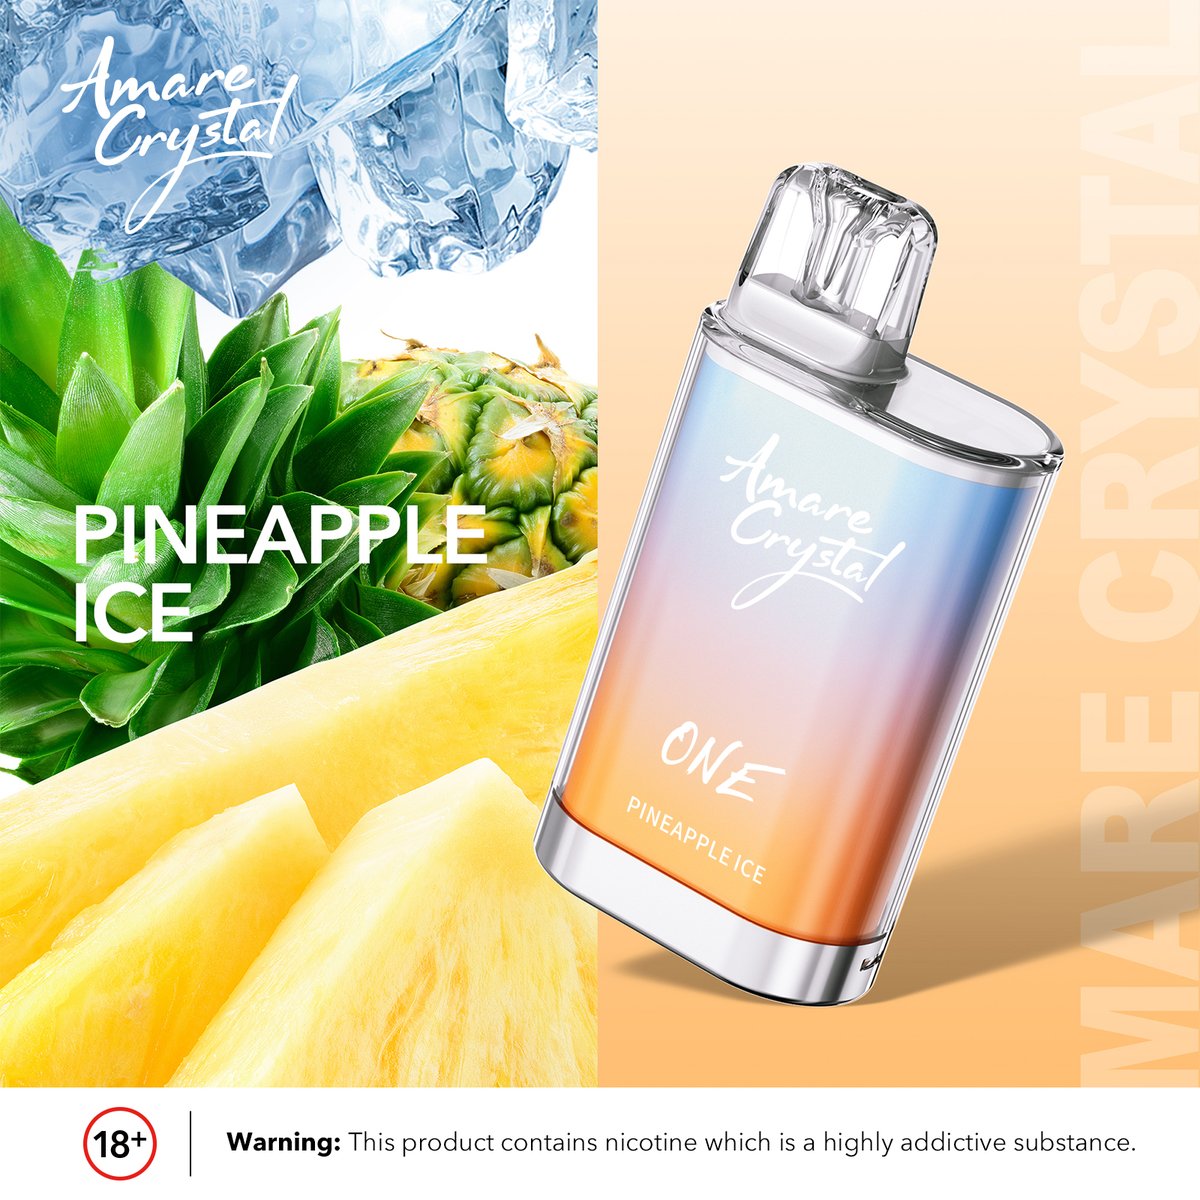 🍍Let's wrap up the week with pineapple Ice on Friday🍍😋
What flavour are you vaping today? Comment tell me😉

Warning: This product contains nicotine which is a highly addictive substance. You must be of legal age to vape!

#amarecrystal #skecrystal #ukvape #ukdisposable